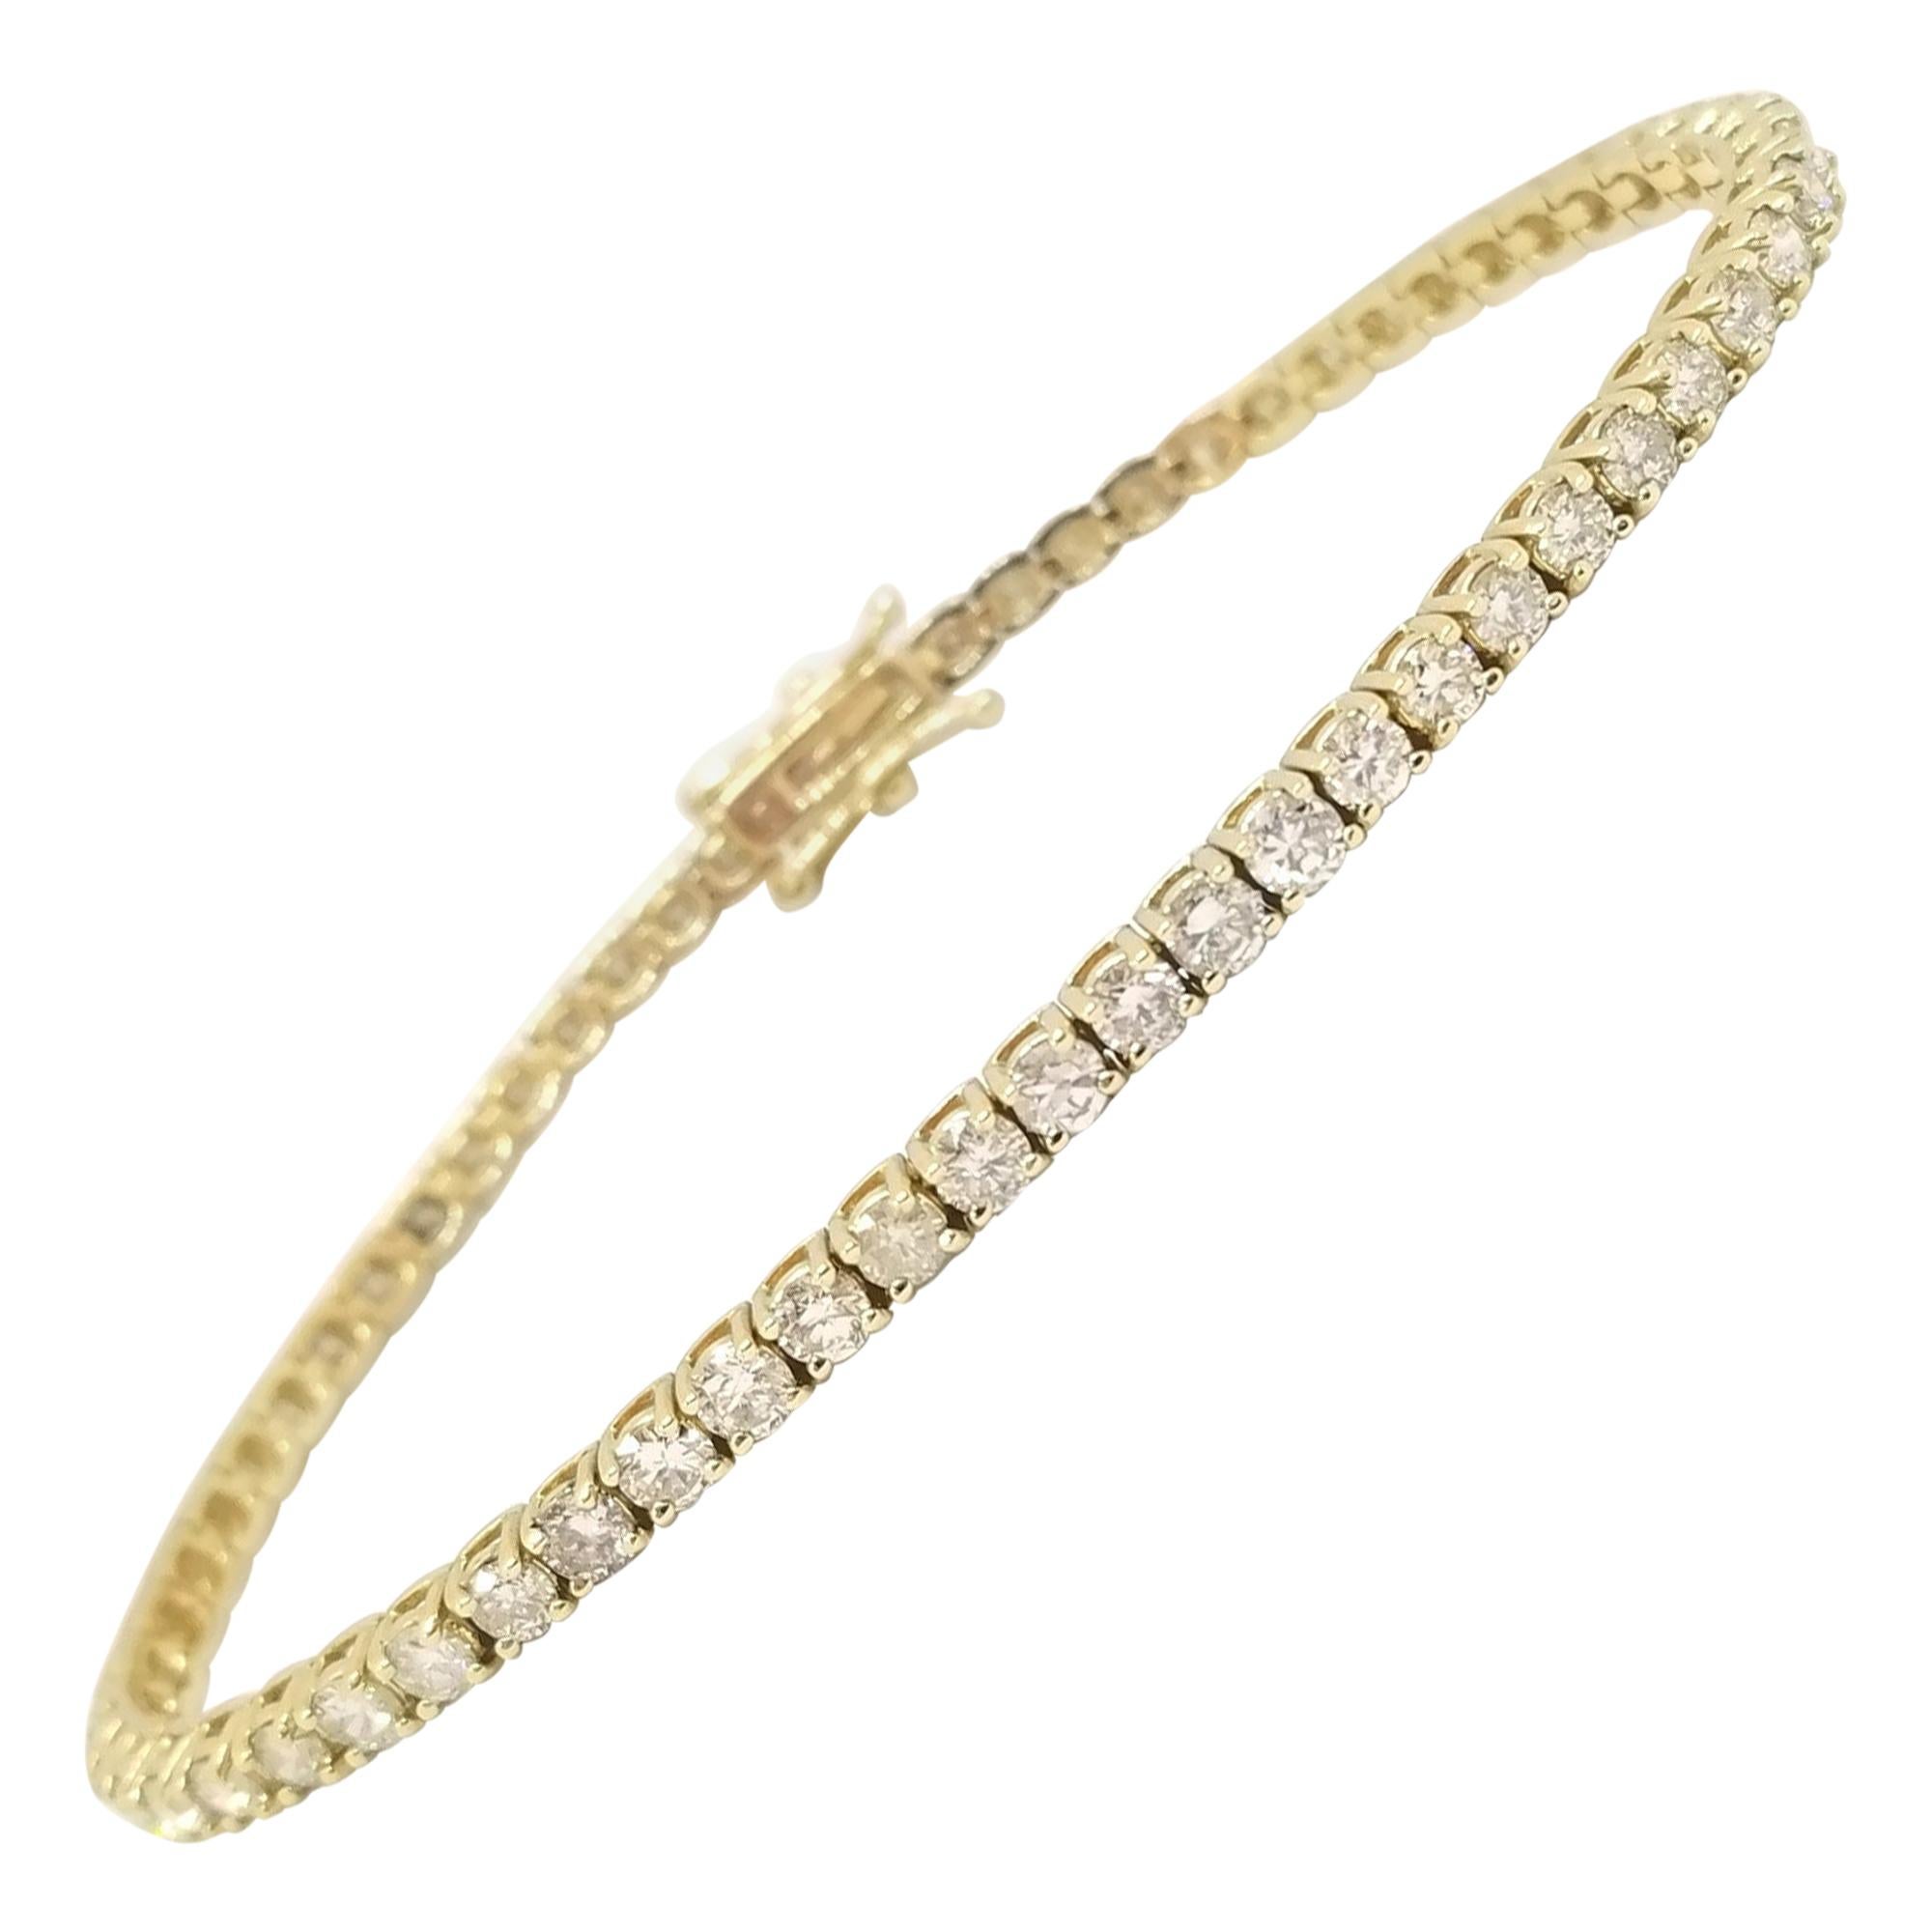 A quality tennis bracelet, round-brilliant cut diamonds. set on 14k yellow gold. each stone is set in a classic four-prong style for maximum light brilliance. 7 inch length.  
Average Color G
Average Clarity VS
2.9 mm wide.